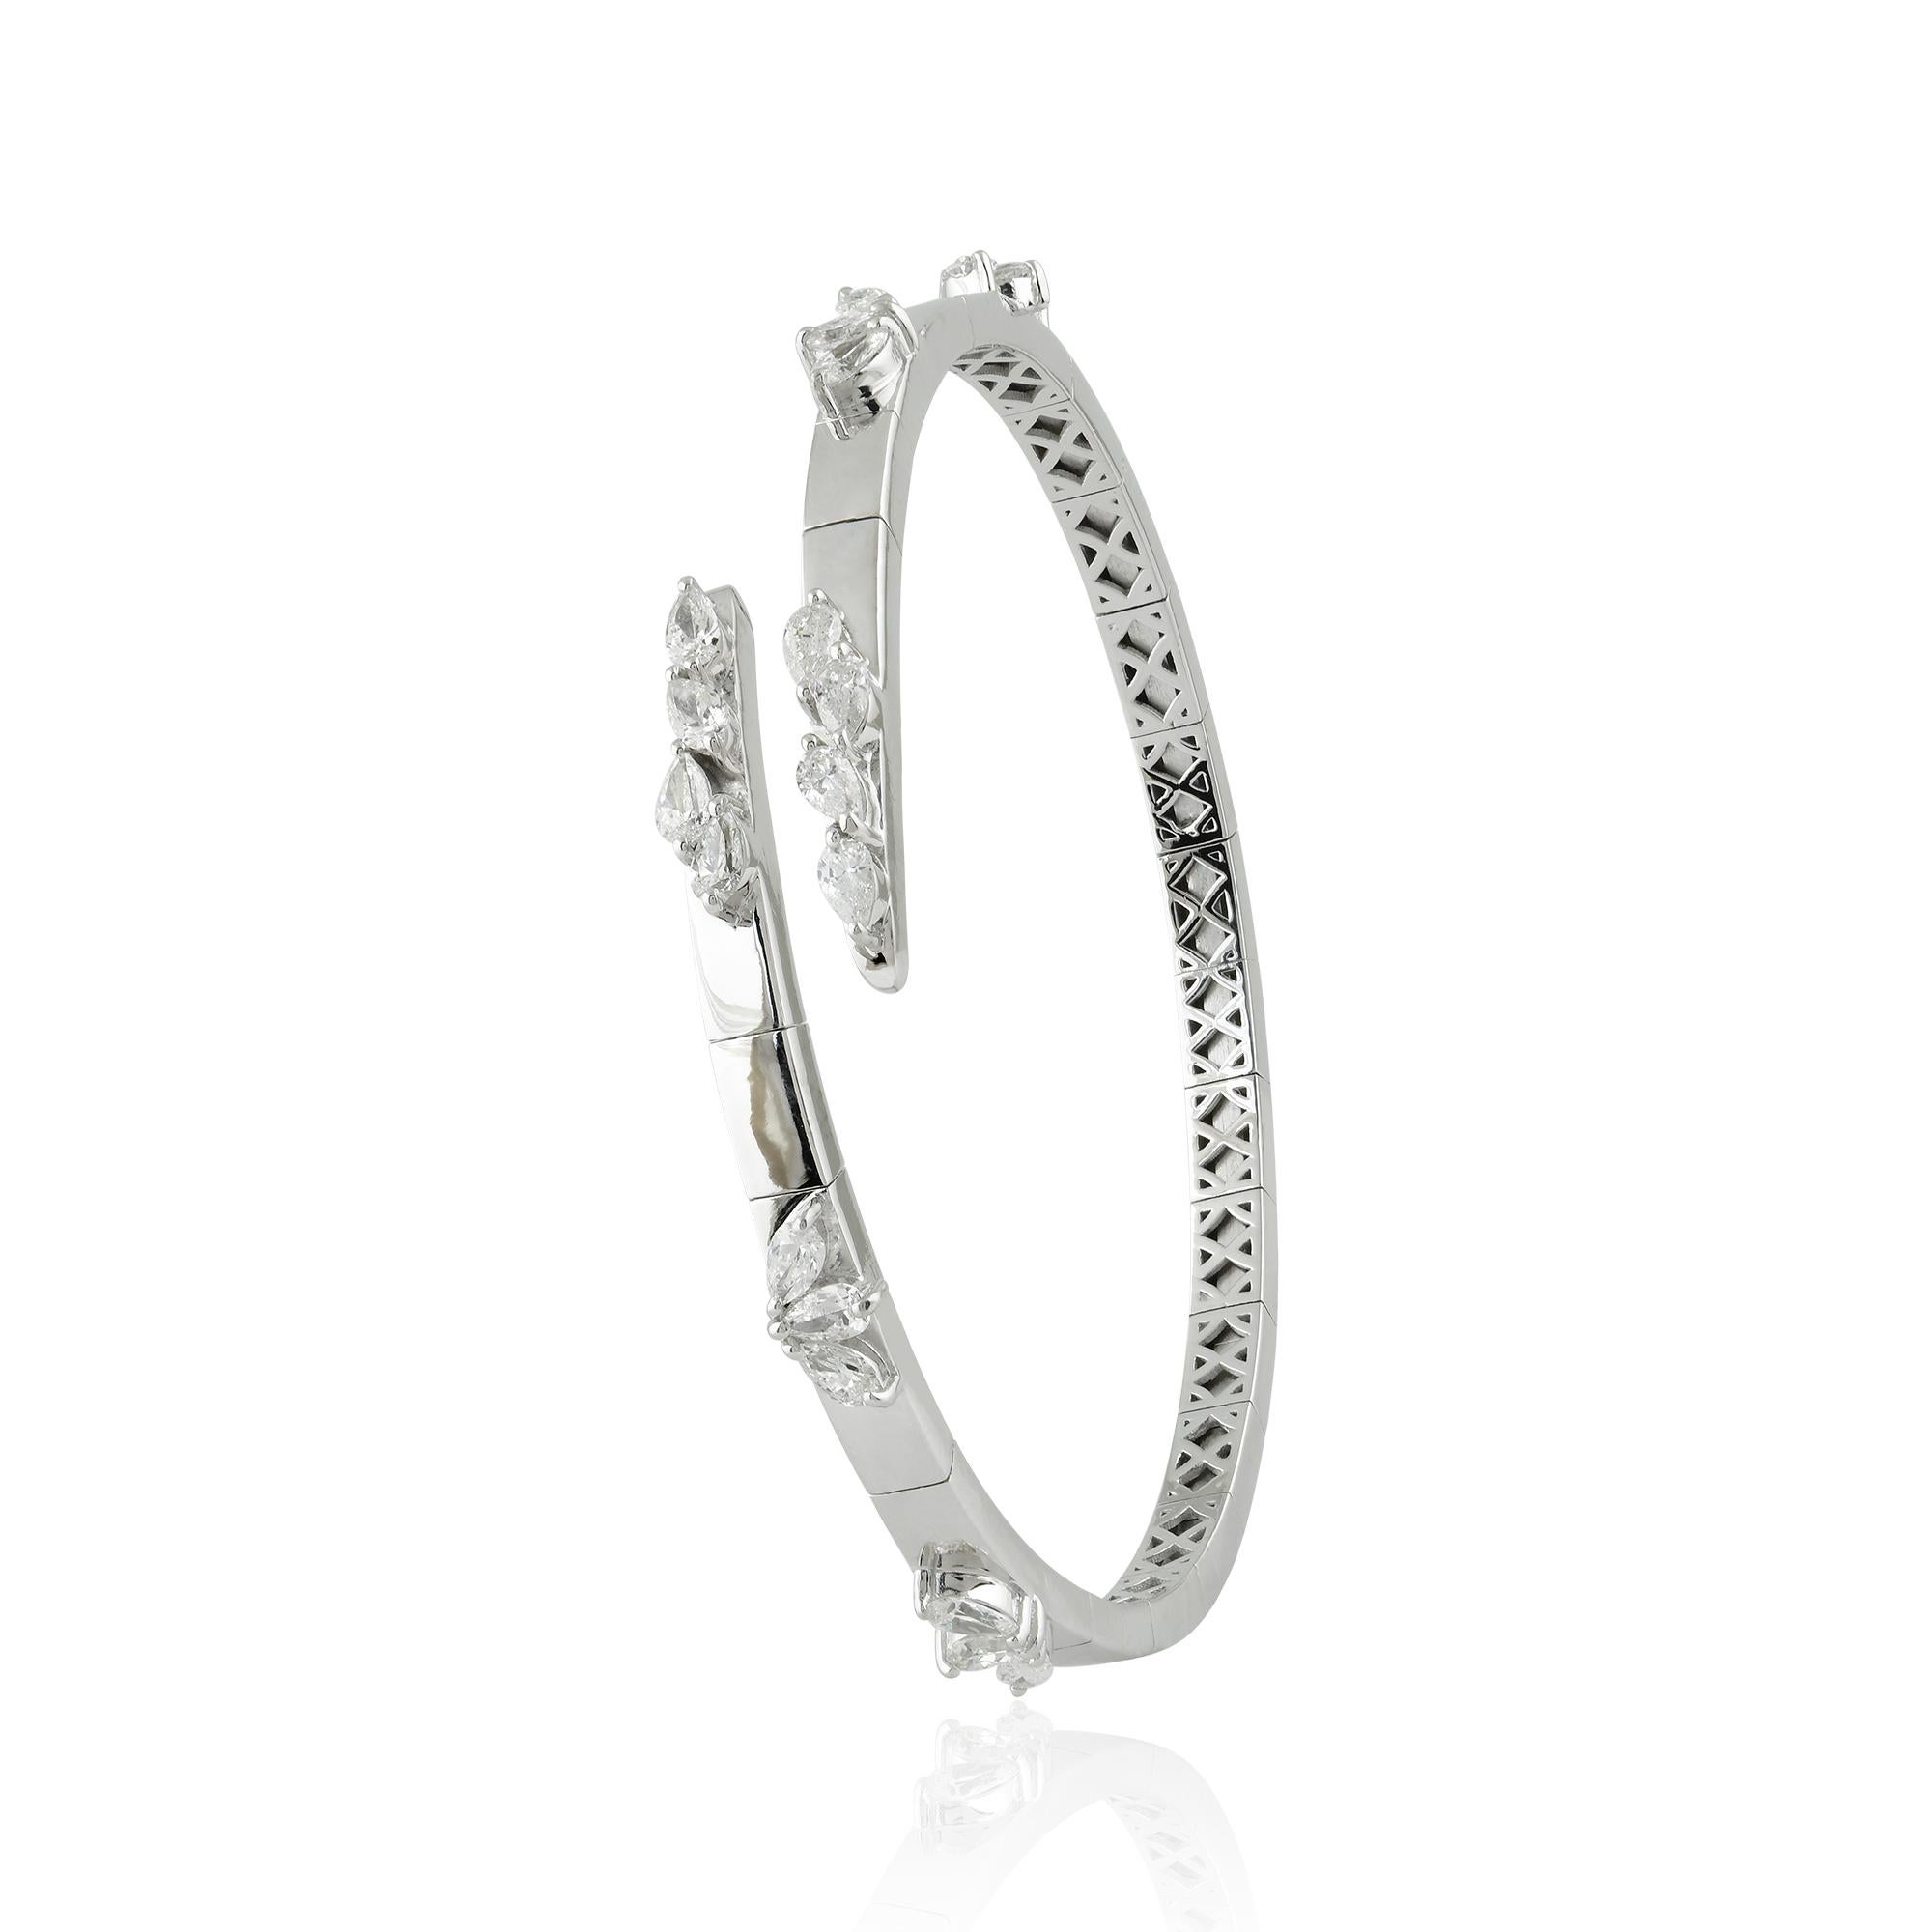 This stunning cluster diamond bangle is the perfect way to add some sparkle and glamour to your jewelry collection. Handcrafted with care and attention to detail, it is a timeless piece that you'll love wearing for years to come.

This is a perfect